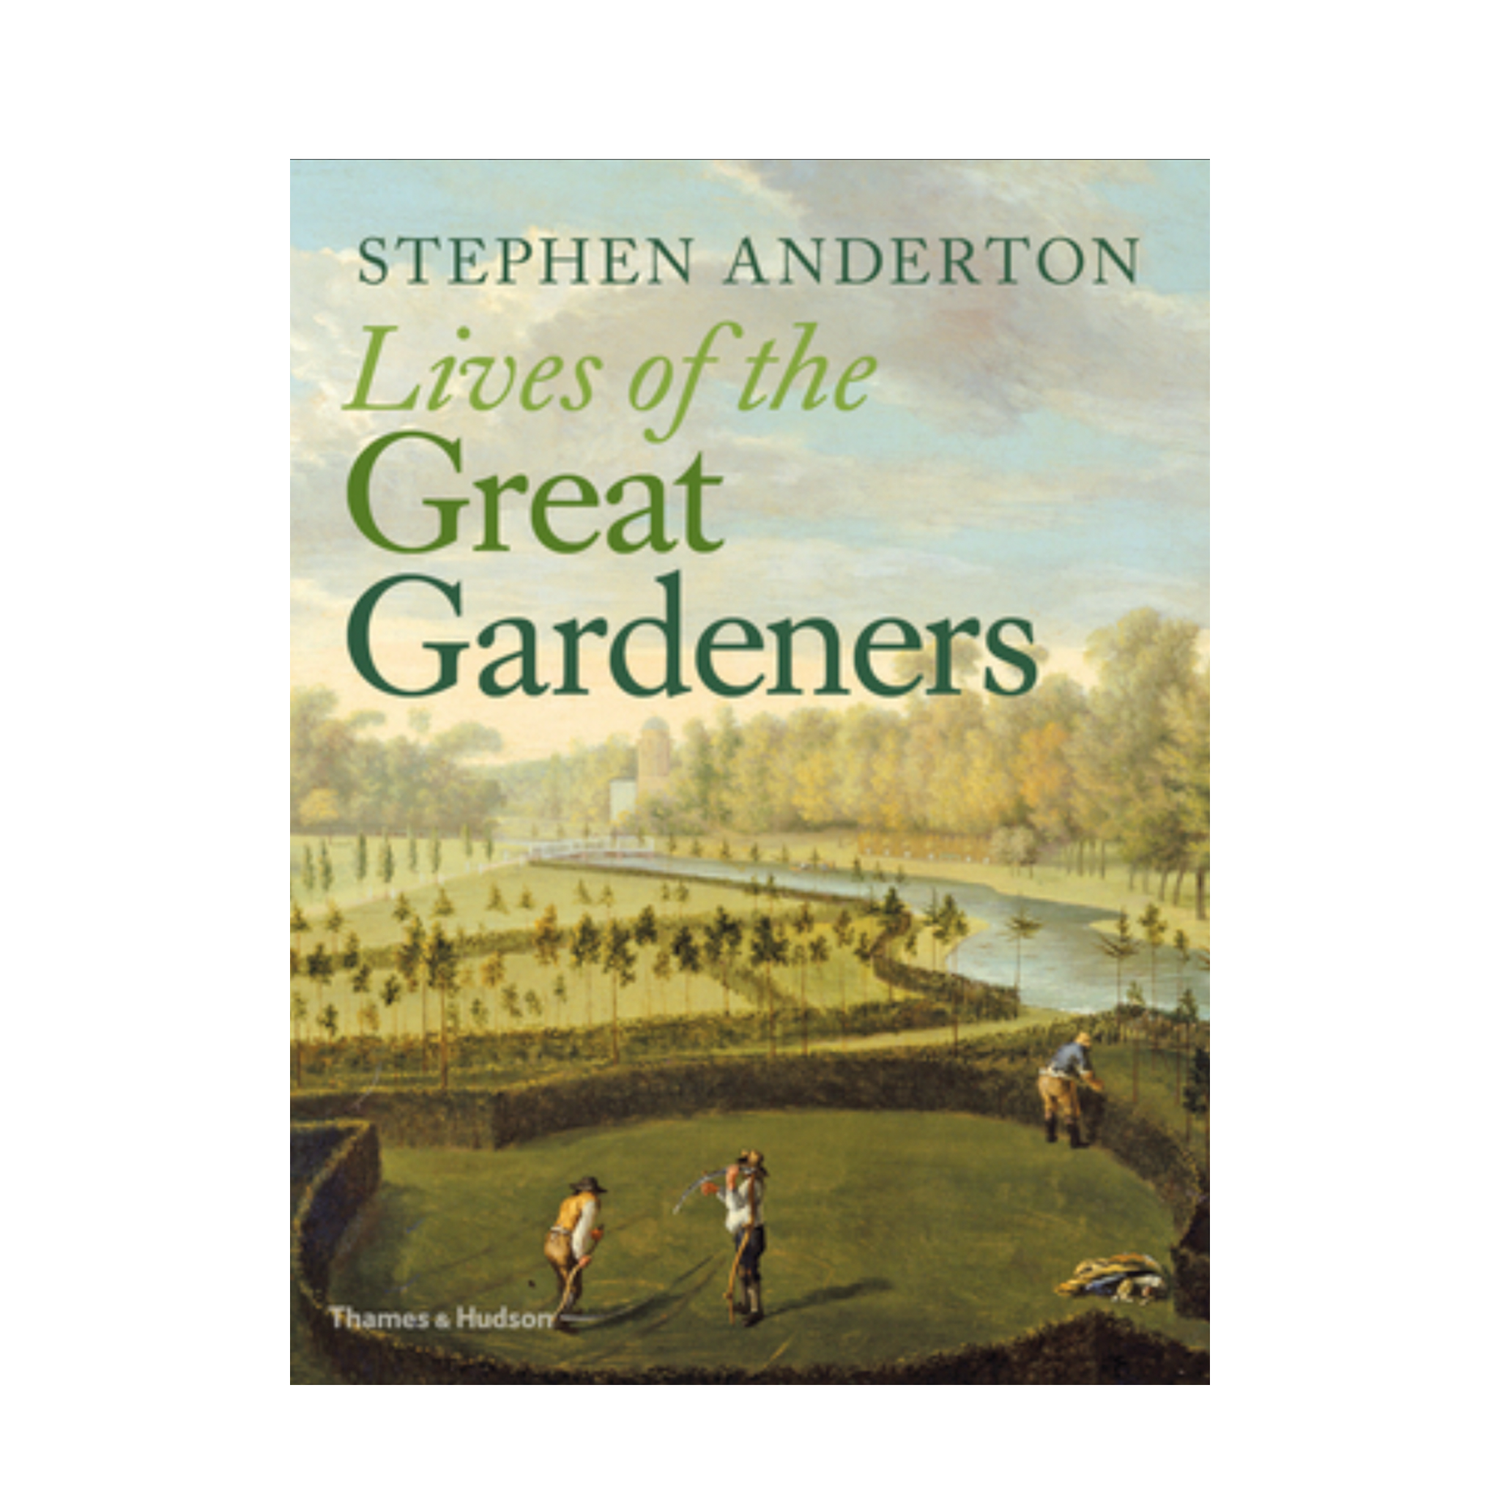 Lives of the Great Gardeners book